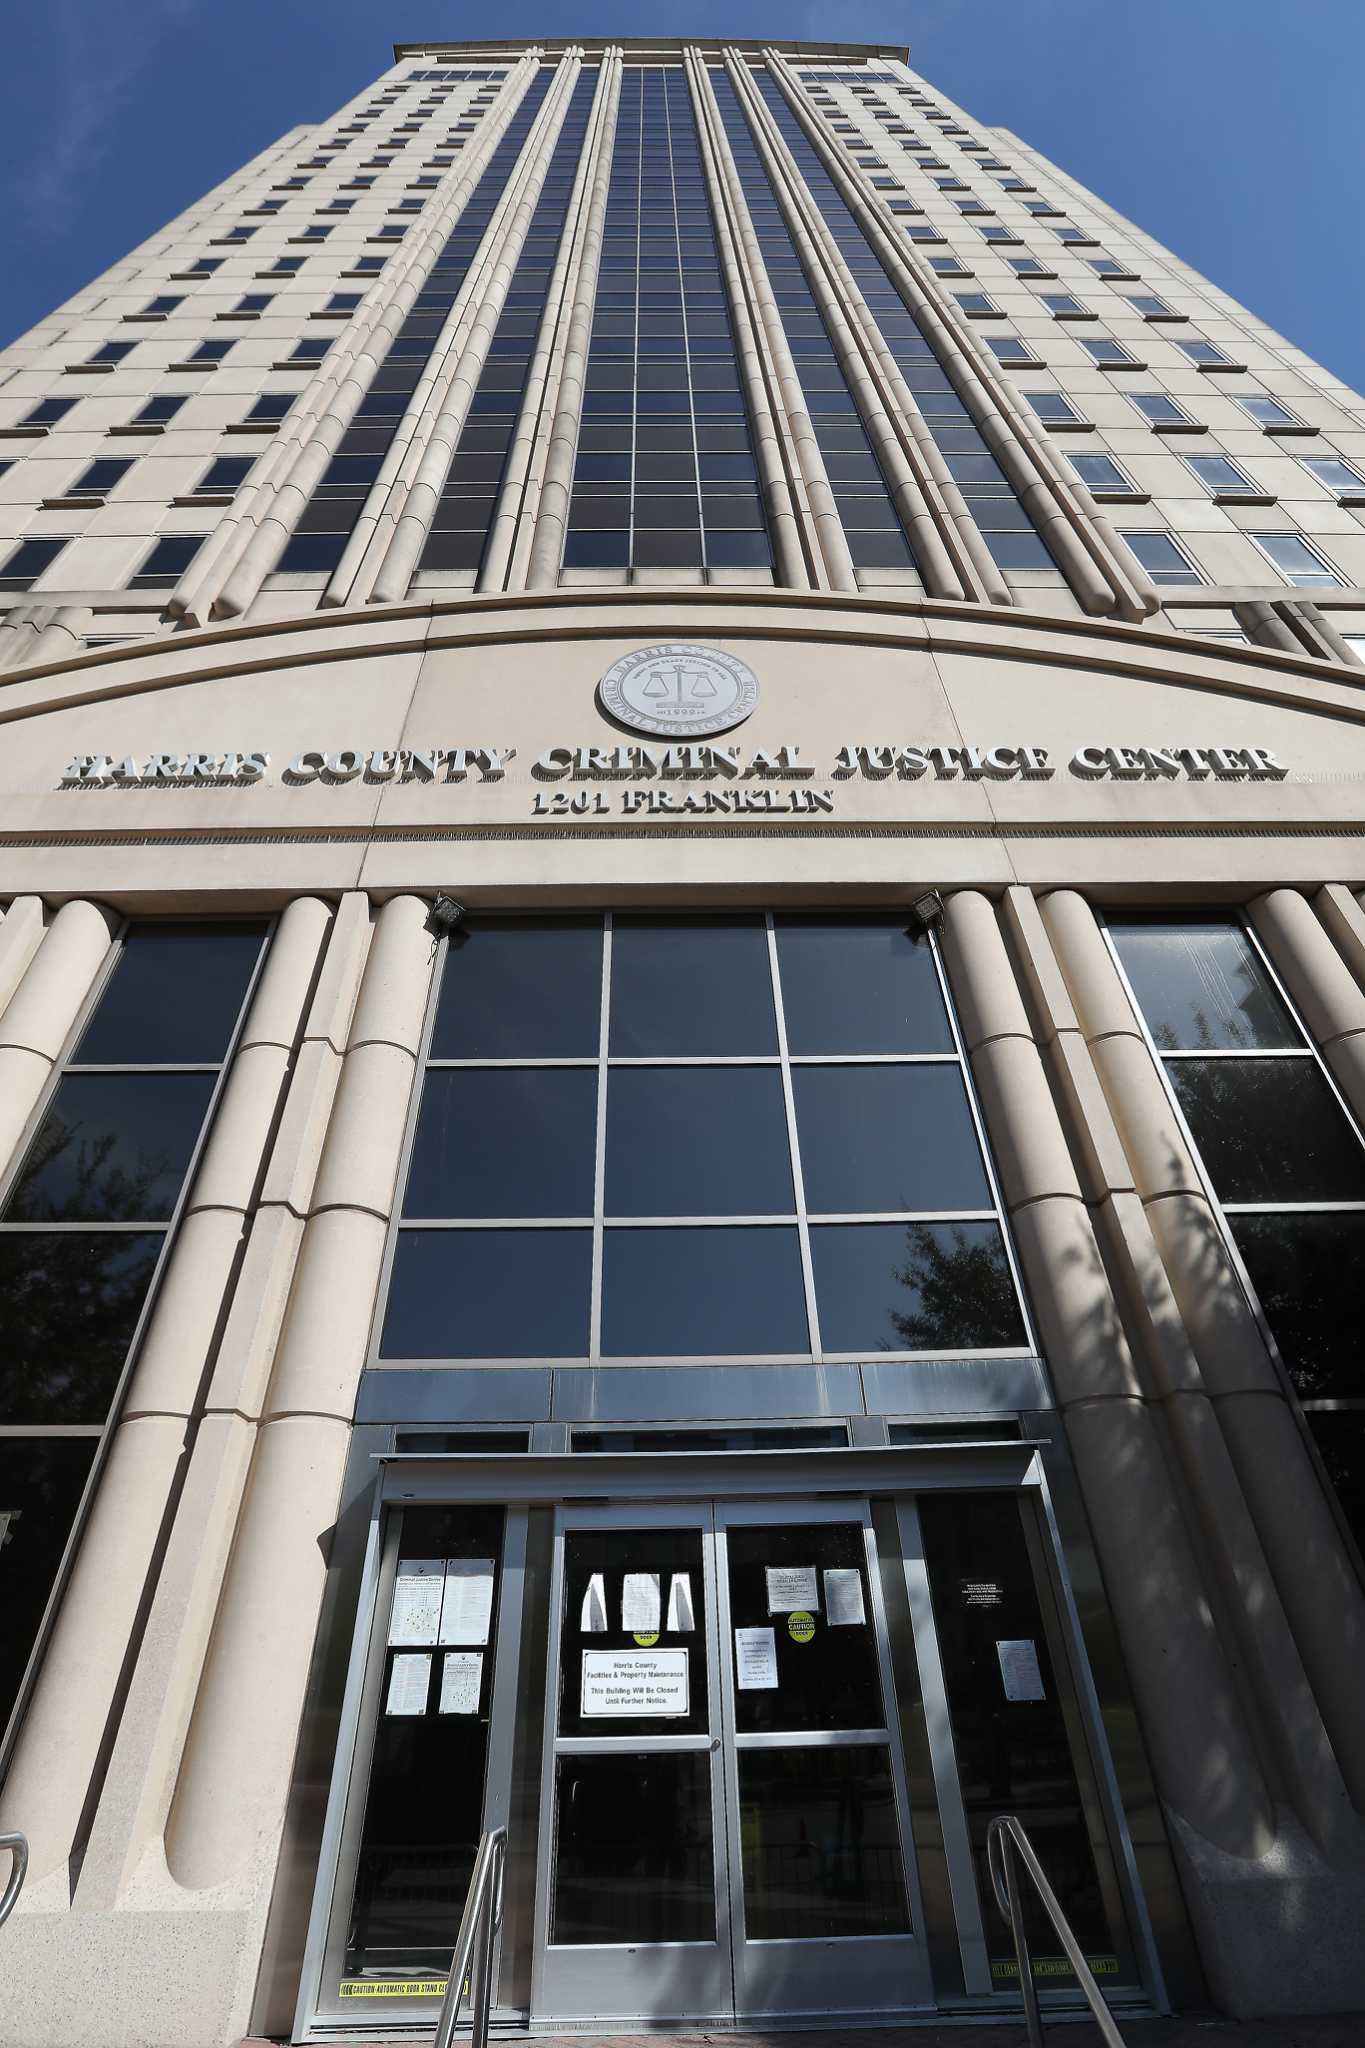 Harris County officials to get update on closed criminal courthouse